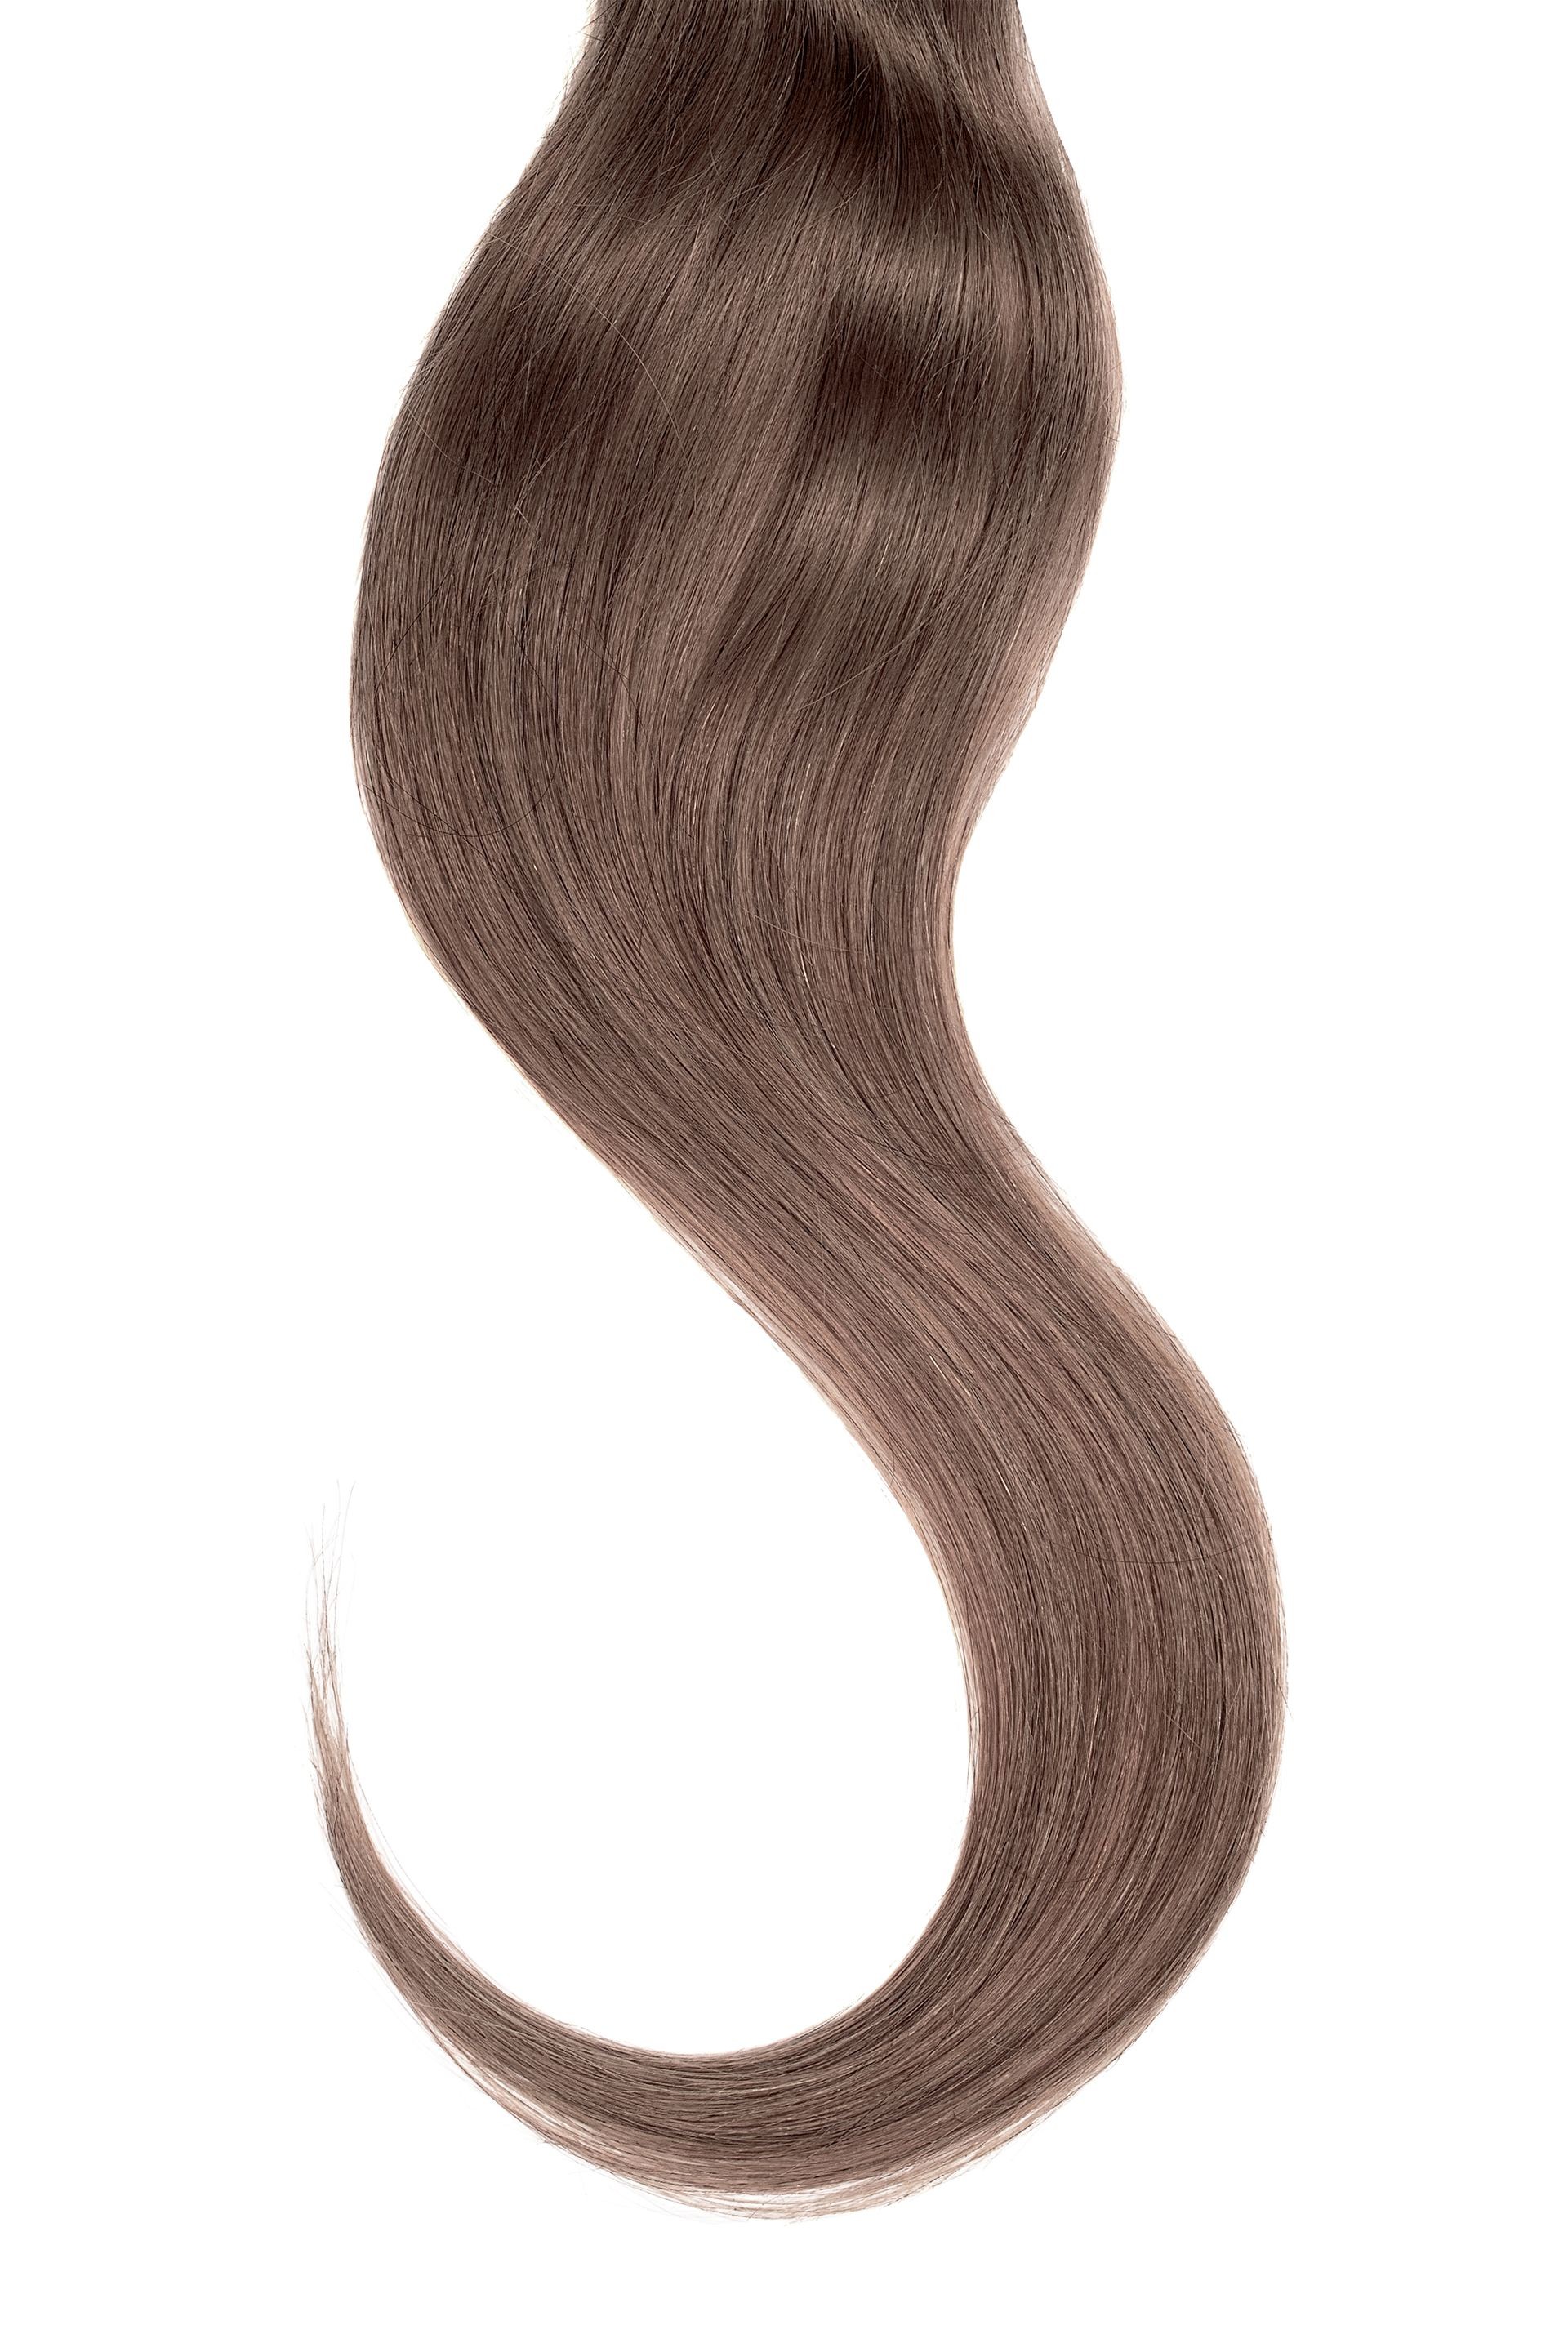 Brown (chocolate) hair isolated on white background. Long wavy ponytail